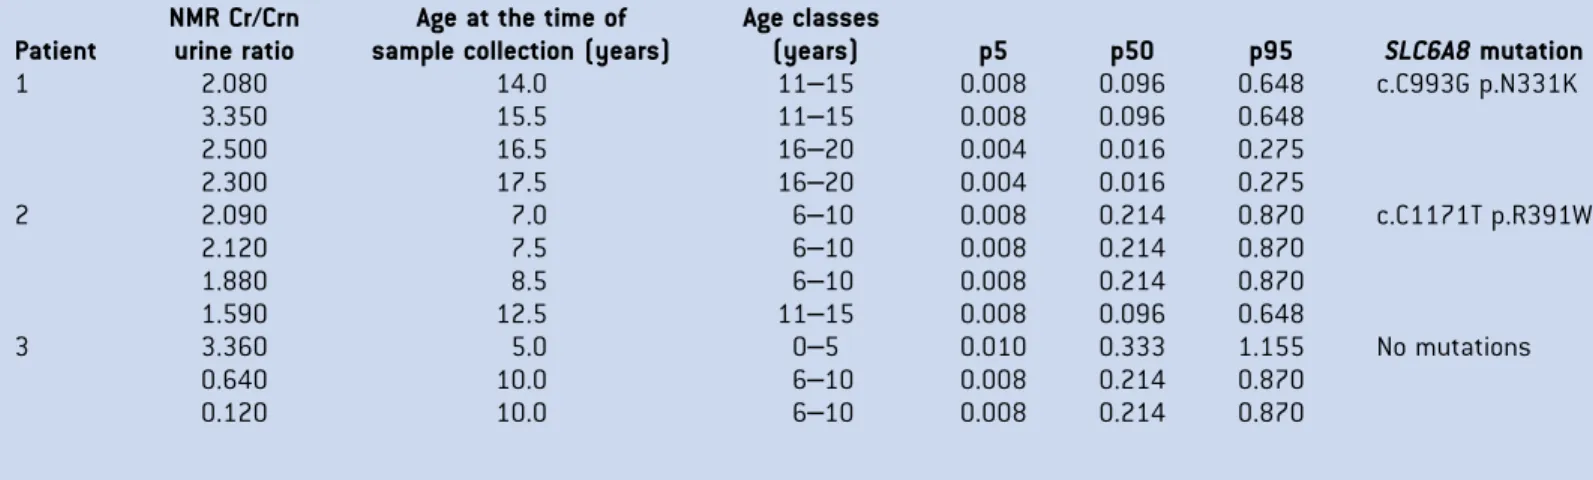 TABLE I. Creatine/Creatinine Ratios Measured by NMR Urine Spectroscopy in Male Patients, Related SLC6A8 Gene Mutations and Age Classes With the Related 5, 50, 95 Percentiles as Calculated After Bootstrap Resampling